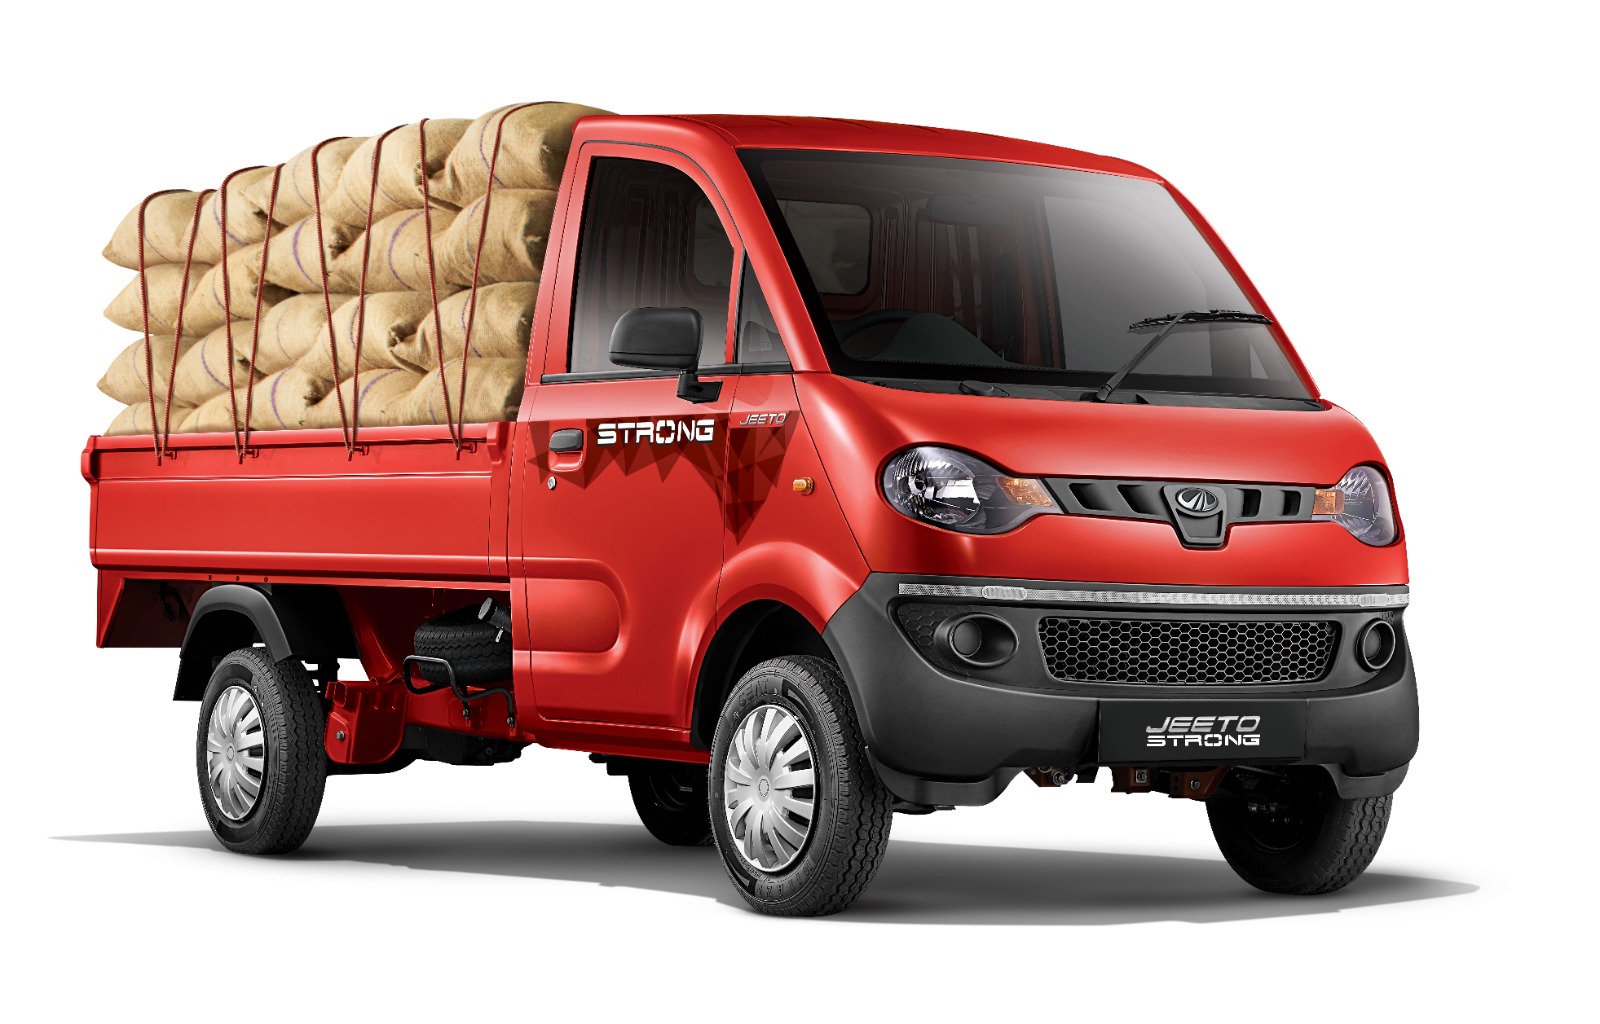 Mahindra launches new Jeeto Strong with enhanced payload capacity, best-in-segment mileage